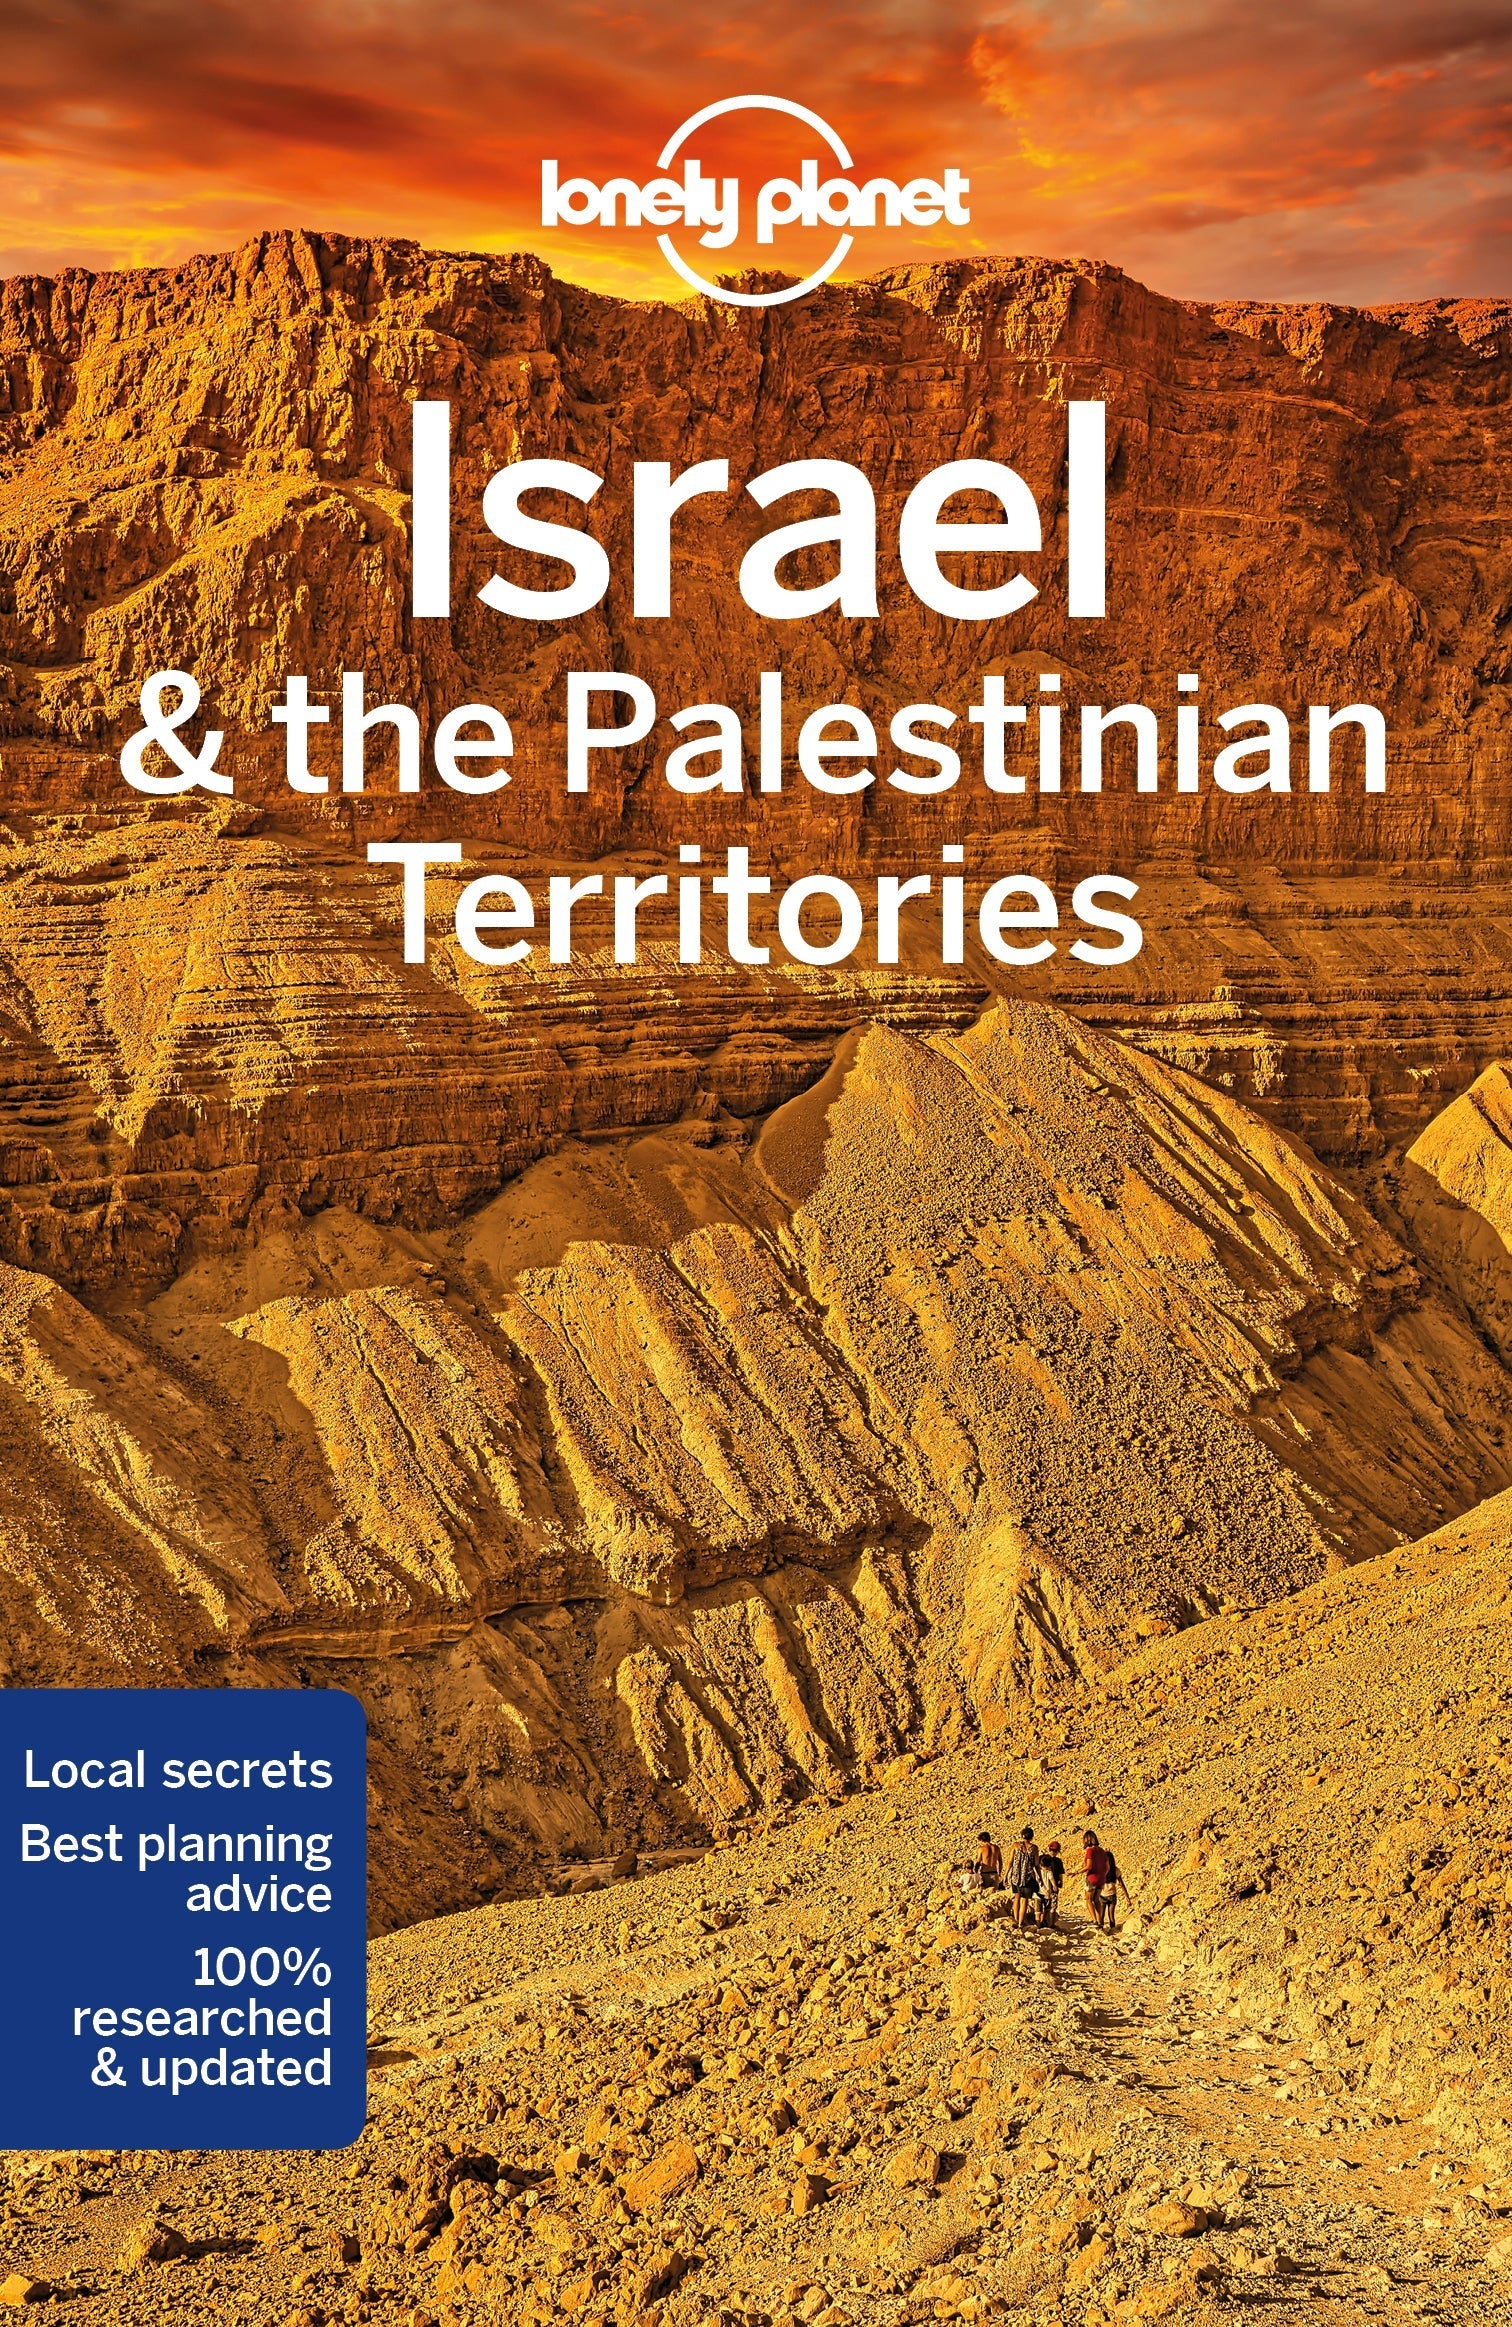 Palestinian　Ebook　Territories　Book　Travel　and　Israel　the